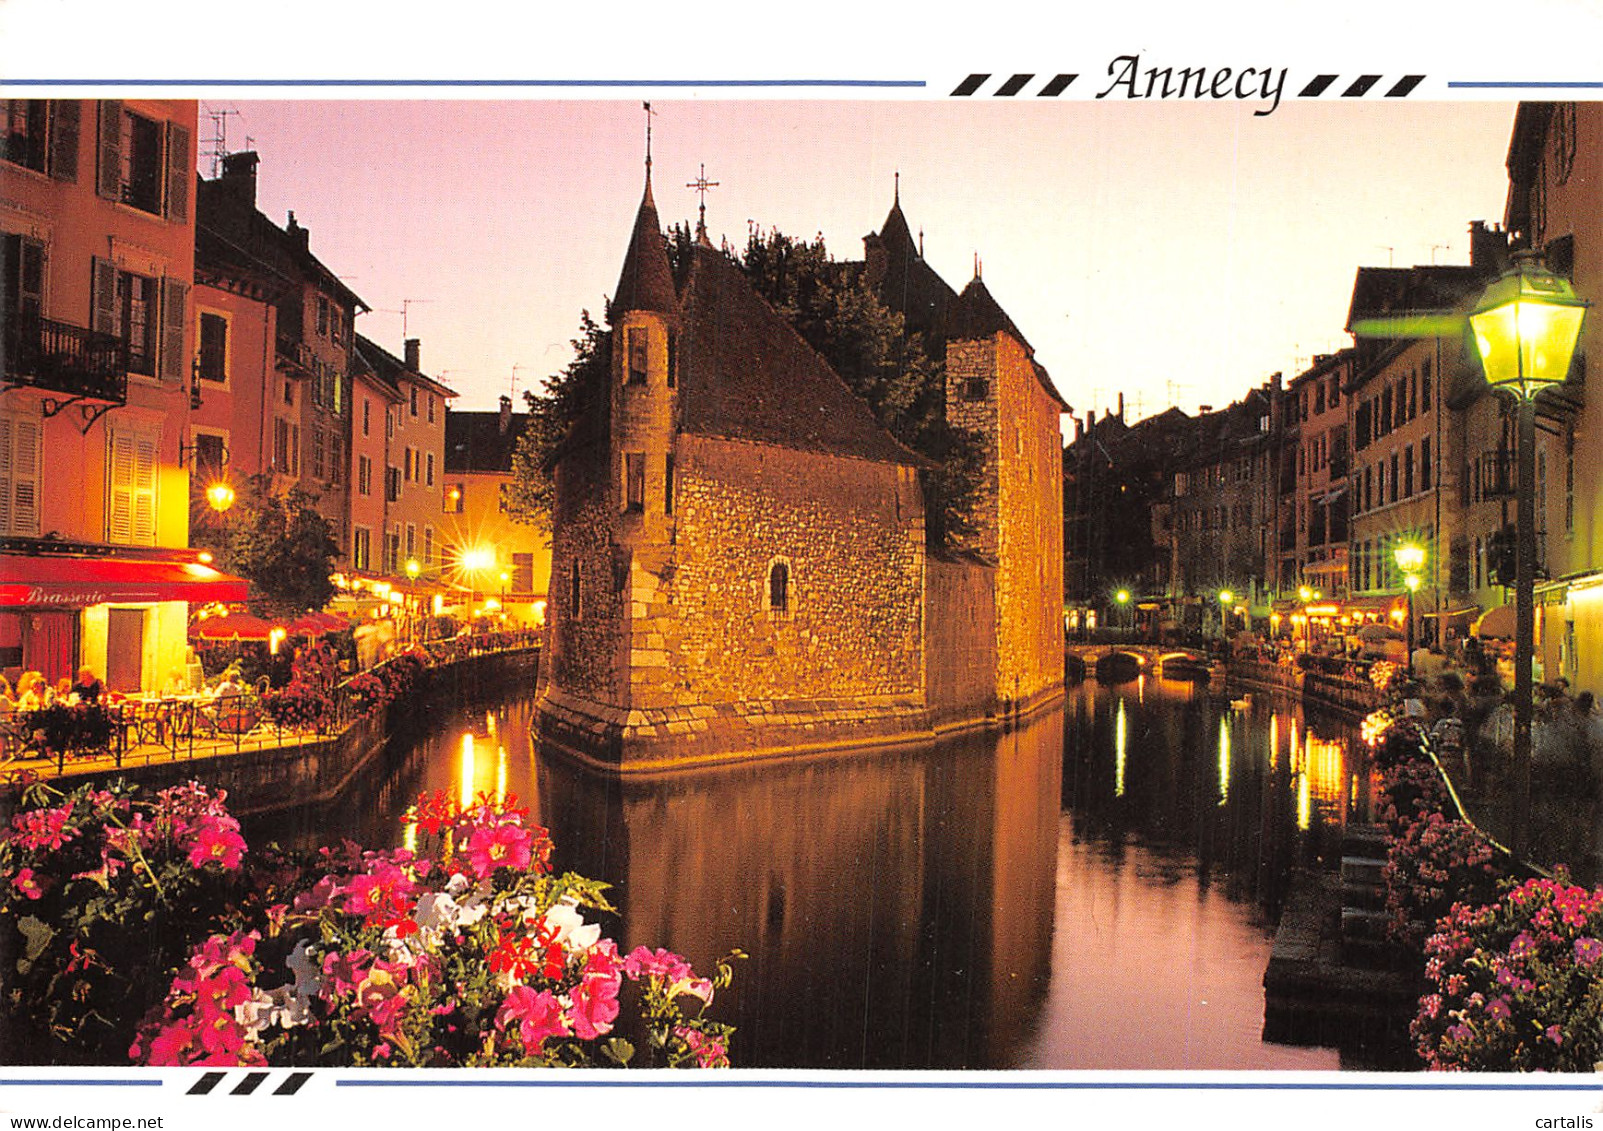 74-ANNECY-N°4212-D/0373 - Annecy